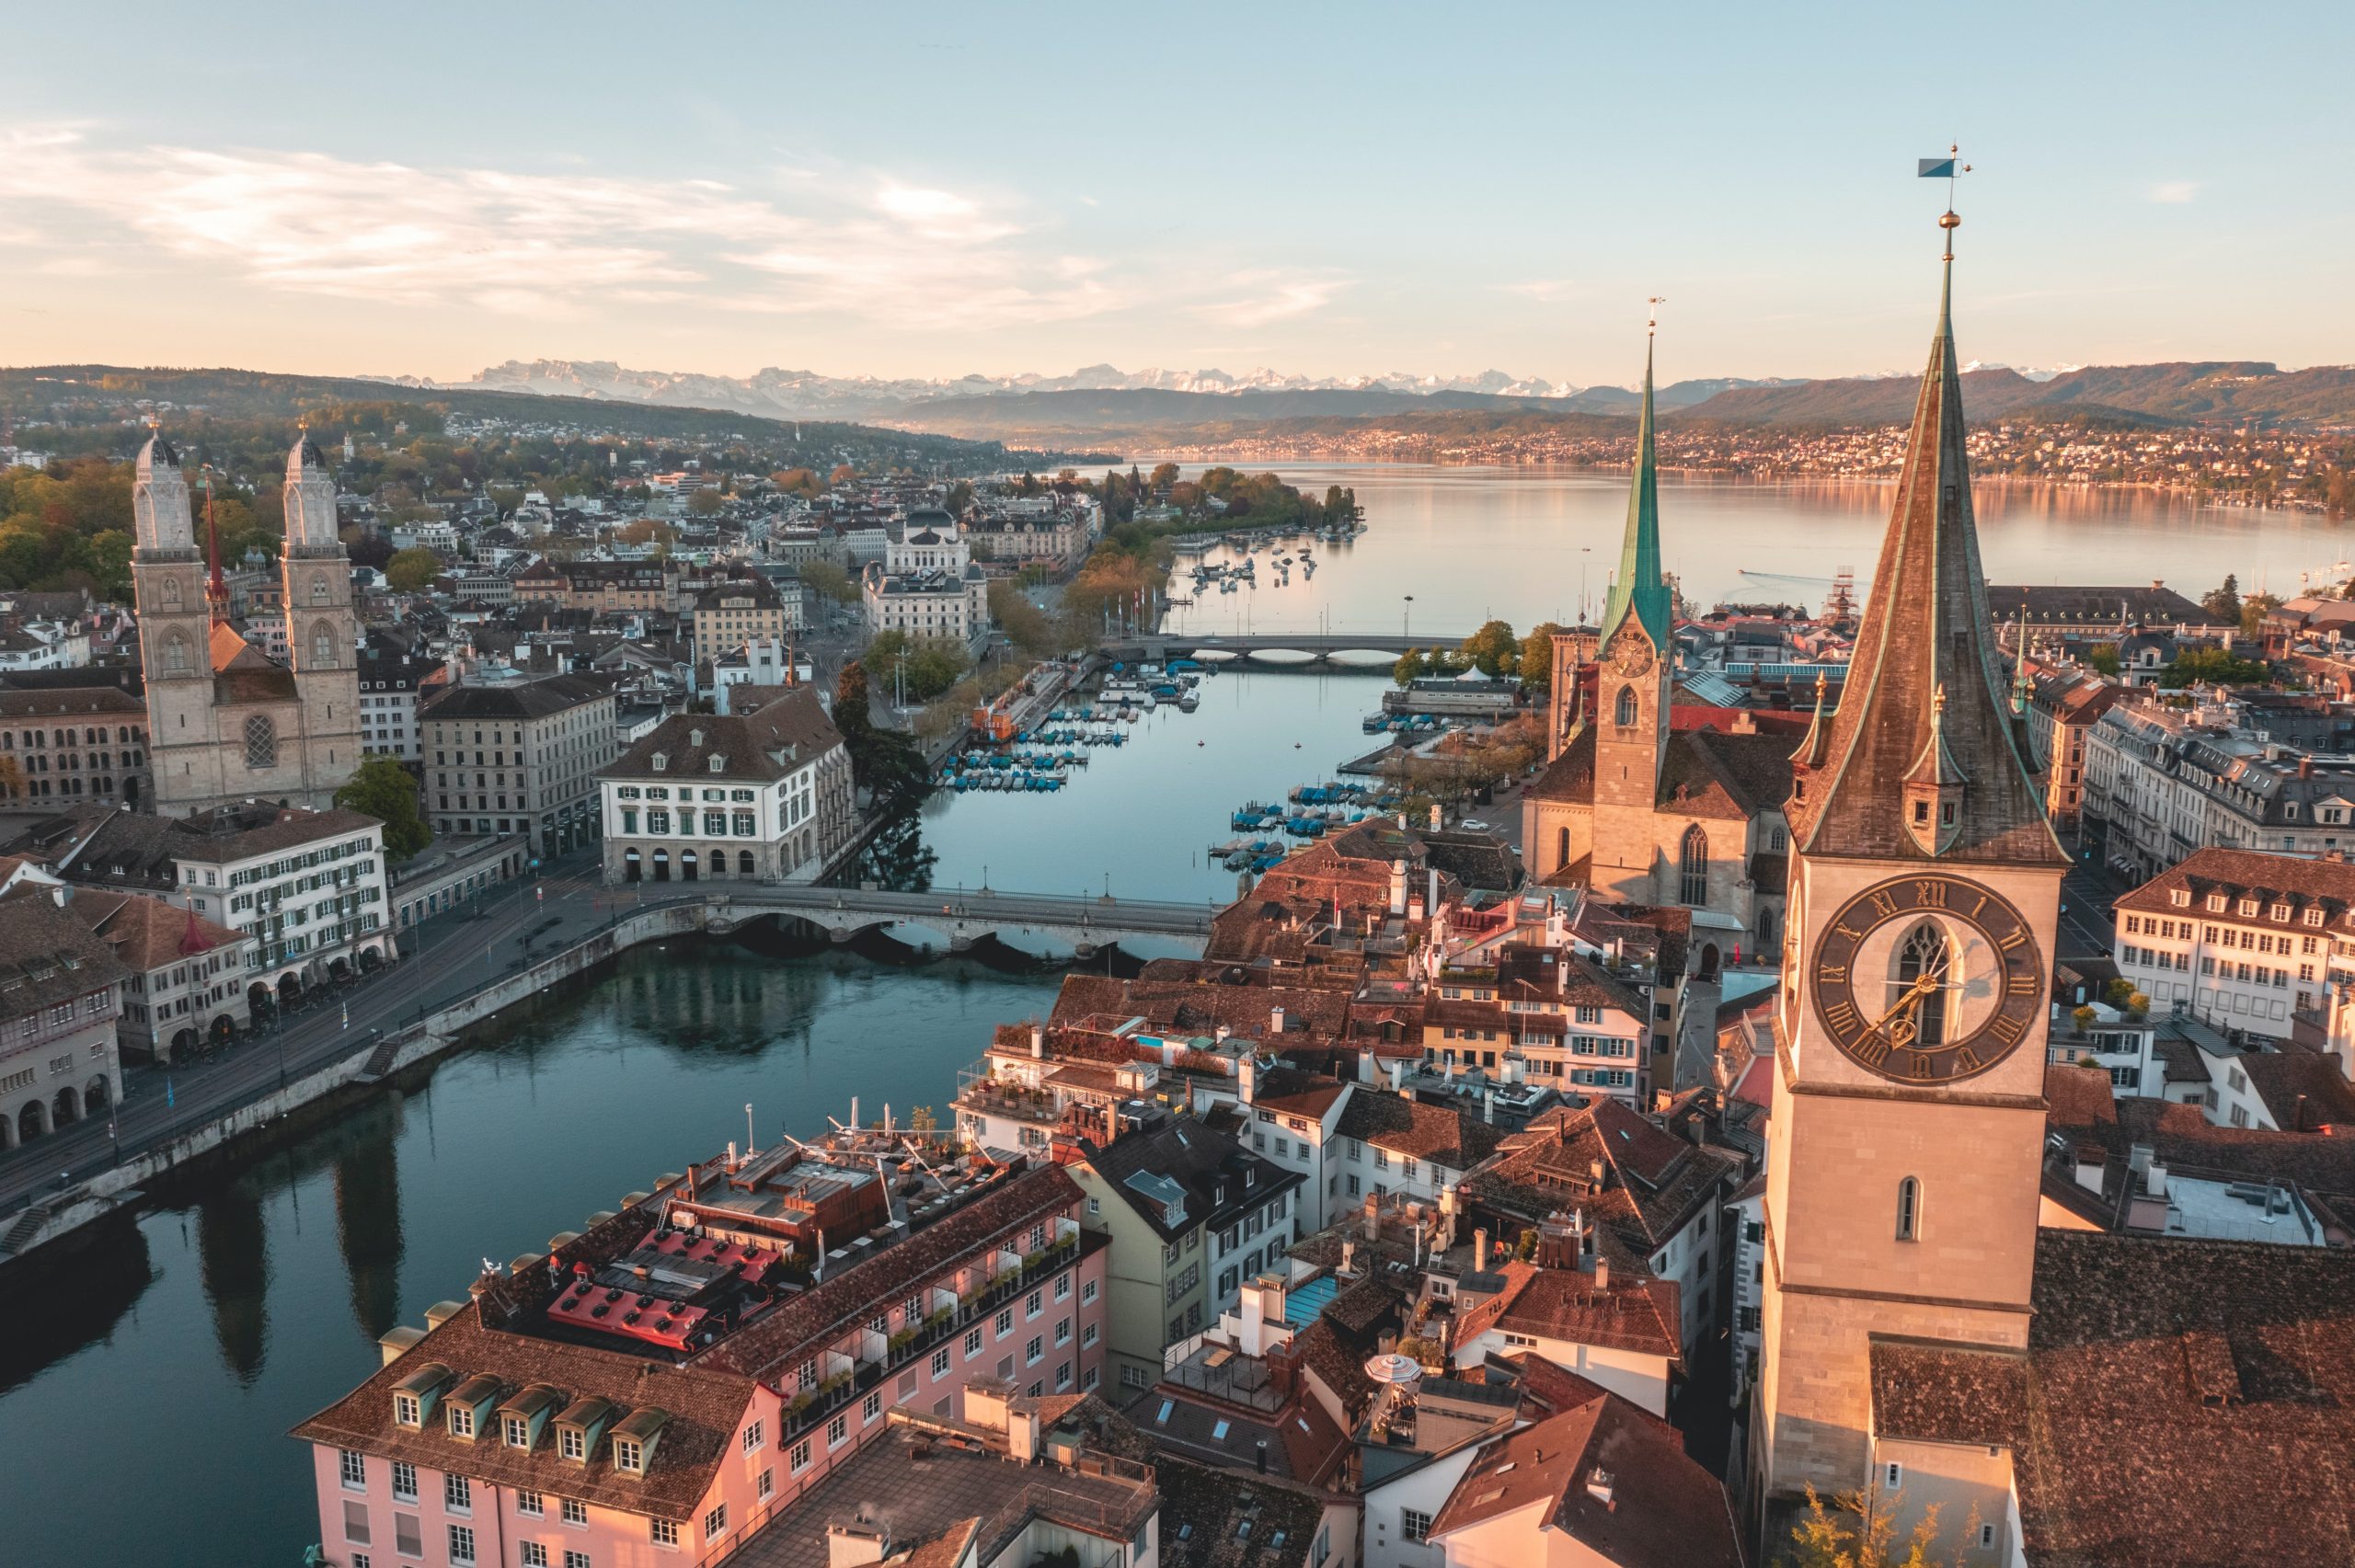 List of the 3 largest service companies from Zurich (city)